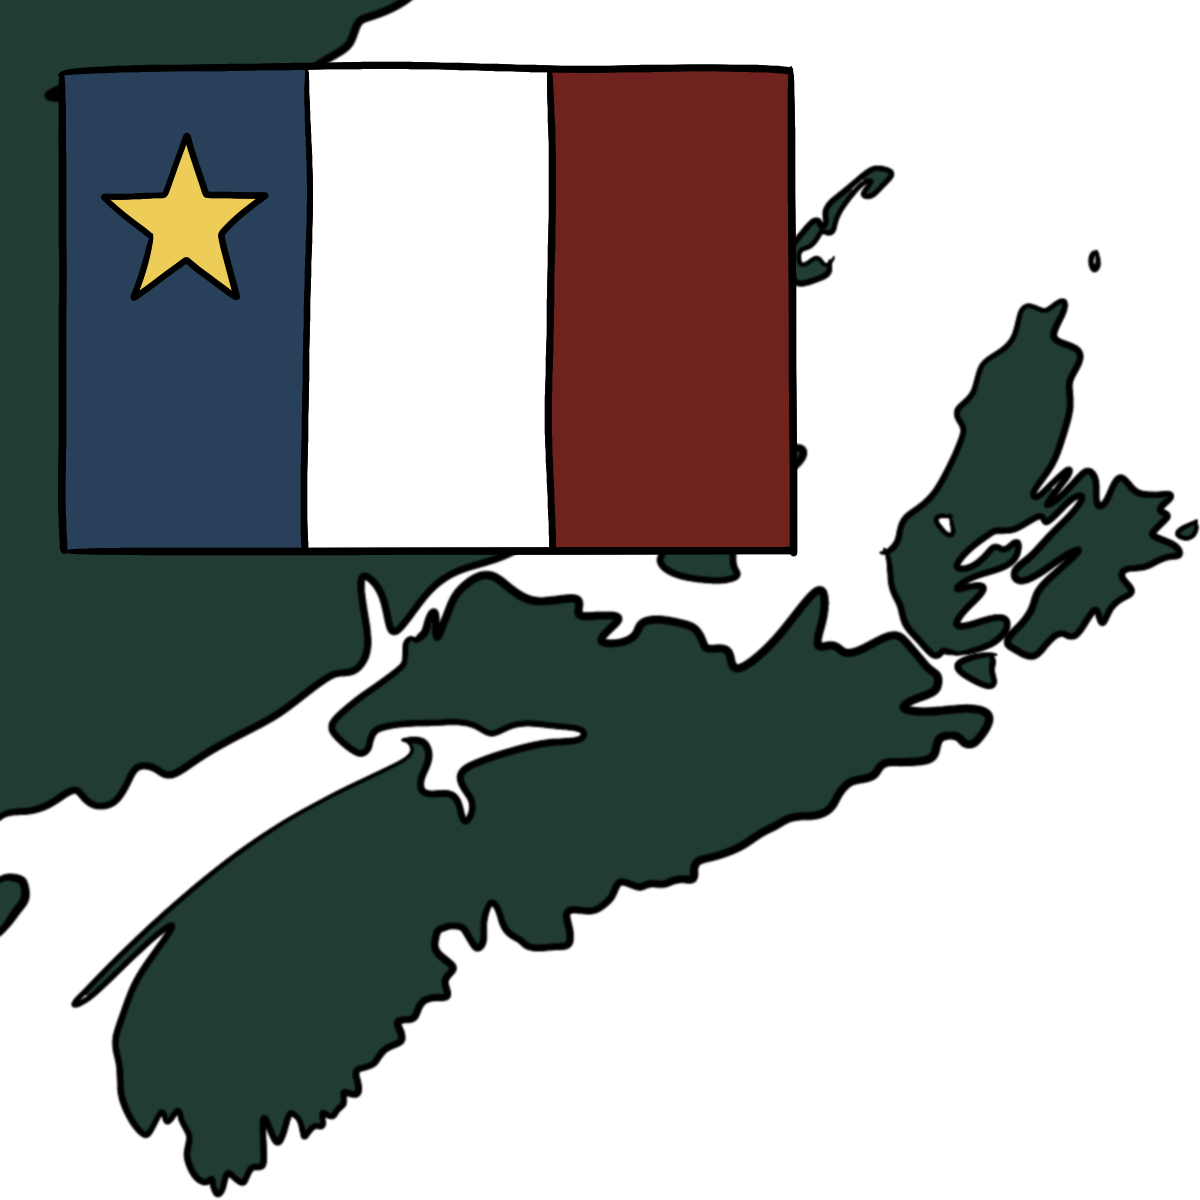 The Acadian flag over a dark green filled outline of the general area of Acadie/Acadia.